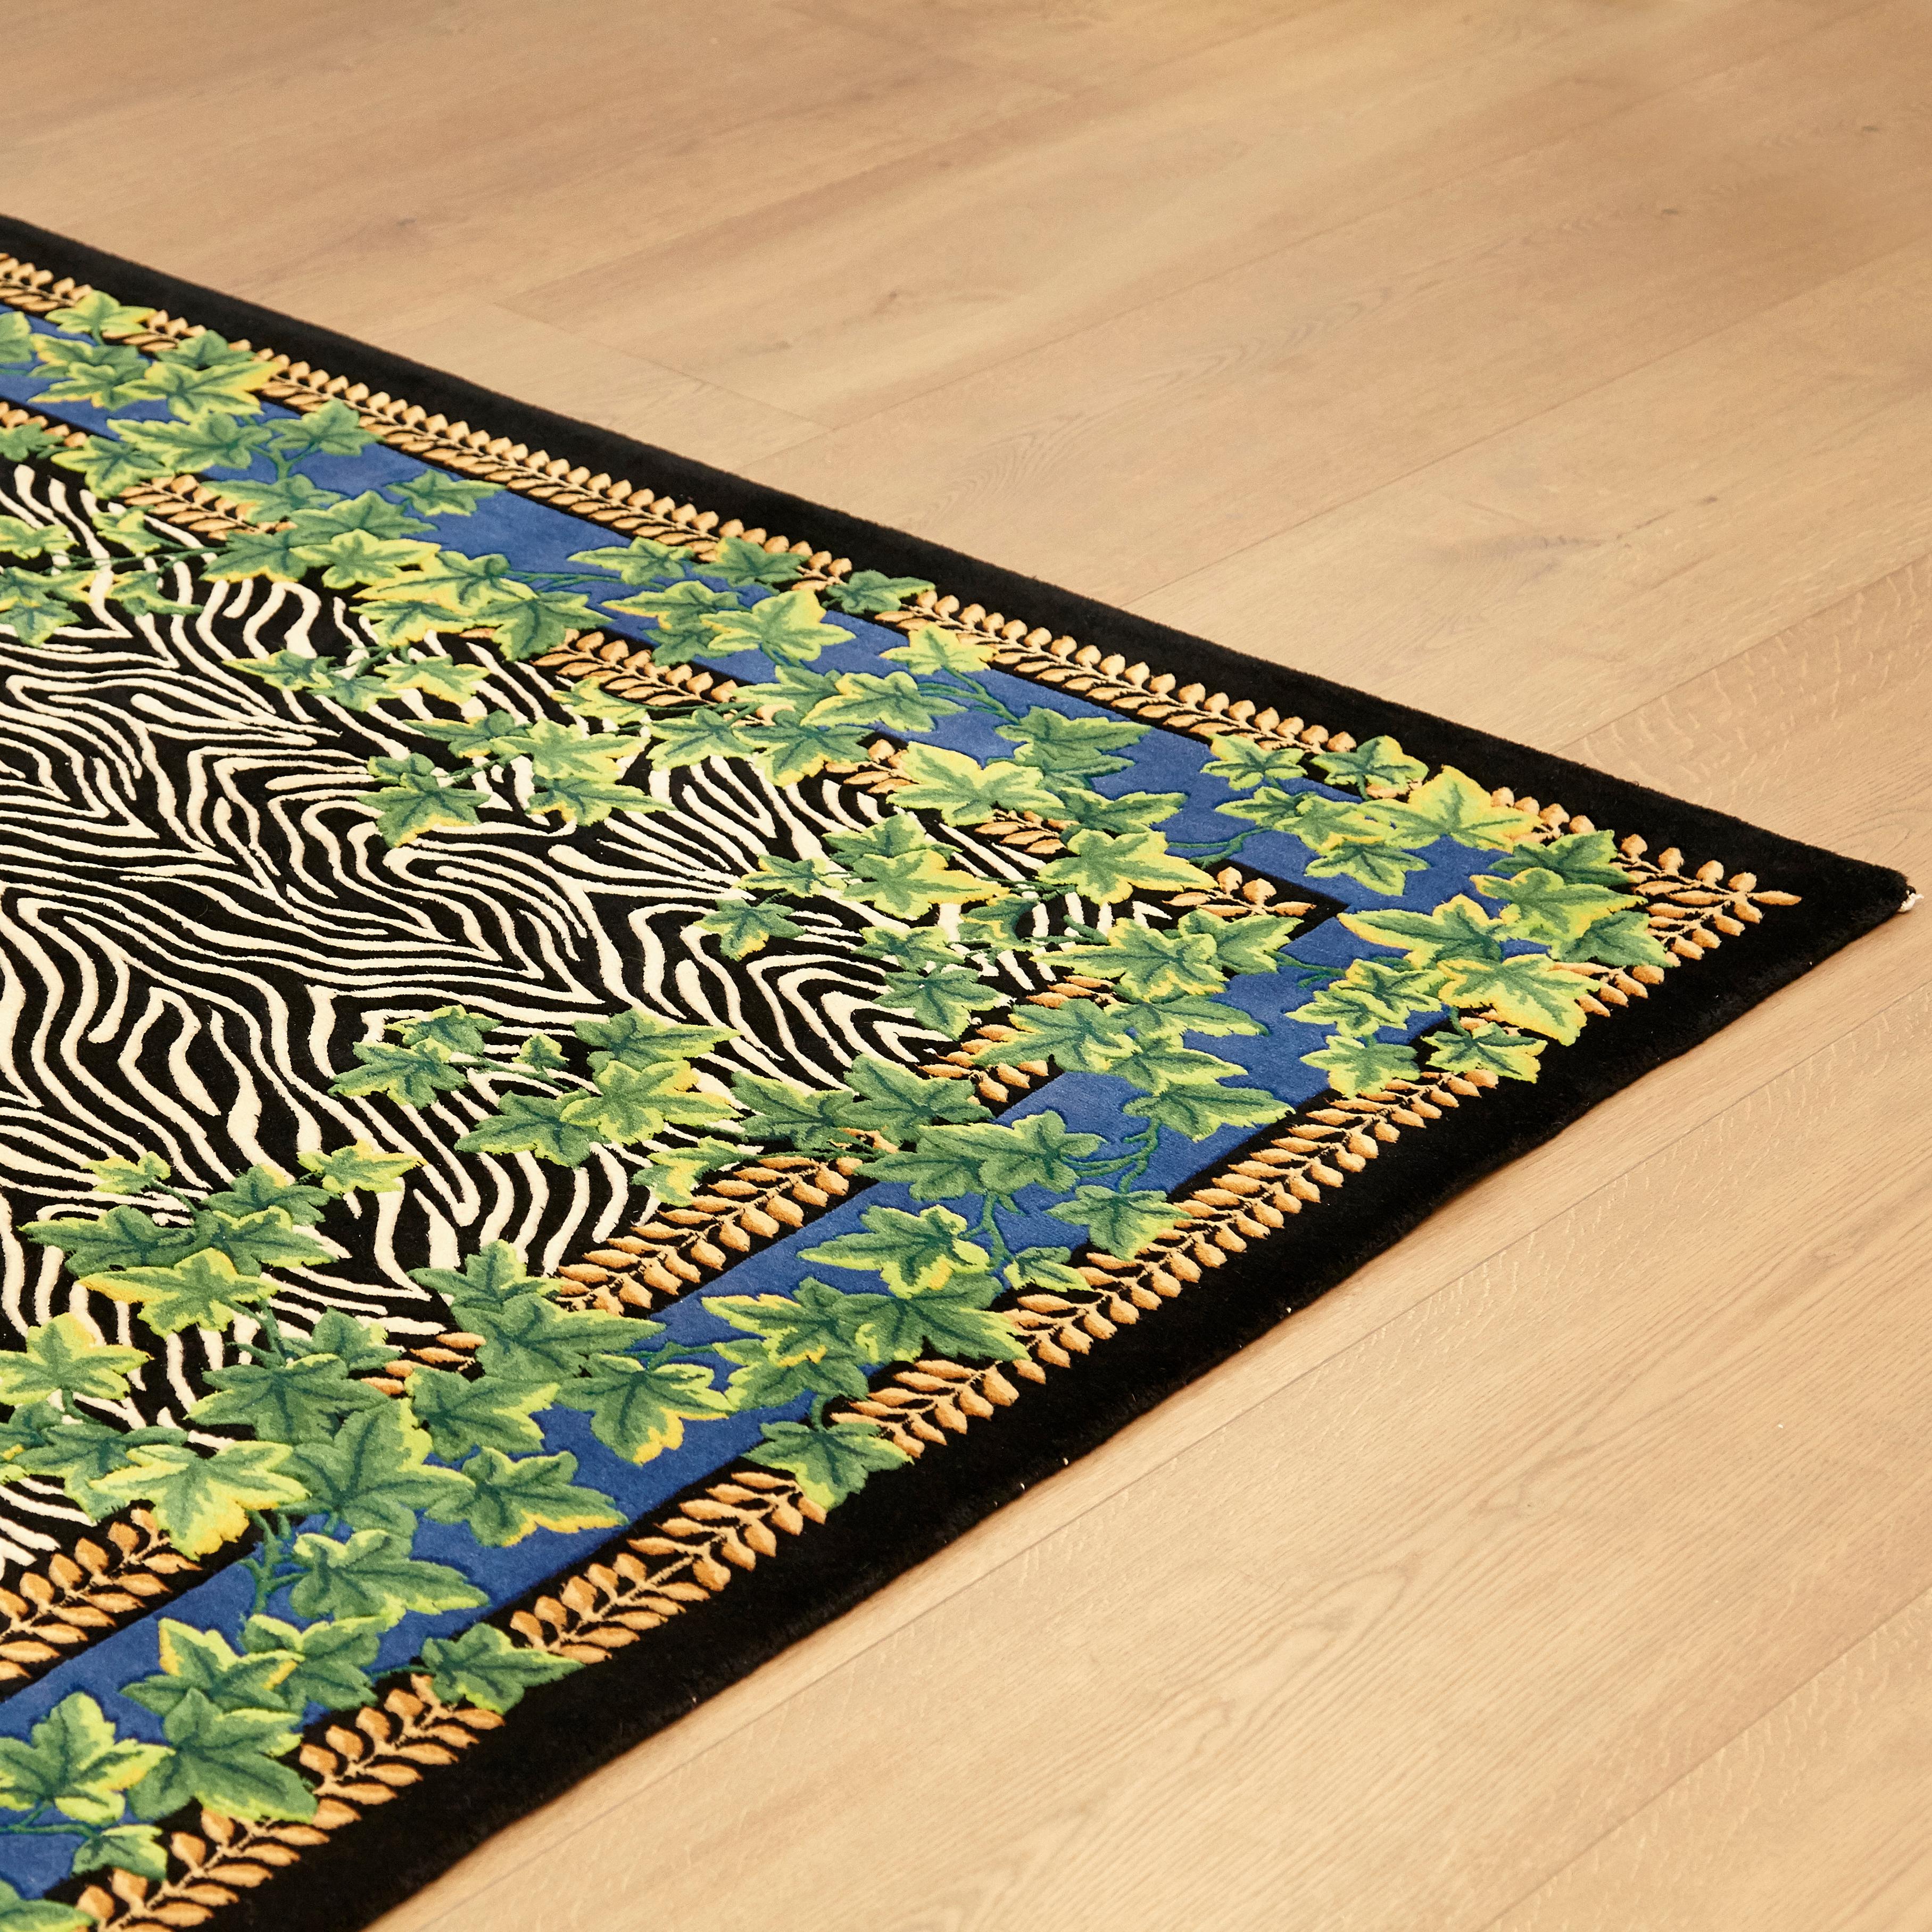 Gianni Versace Collection Rug Wild Ivy, Gold Zebra Animal Print, 1980 For Sale 4